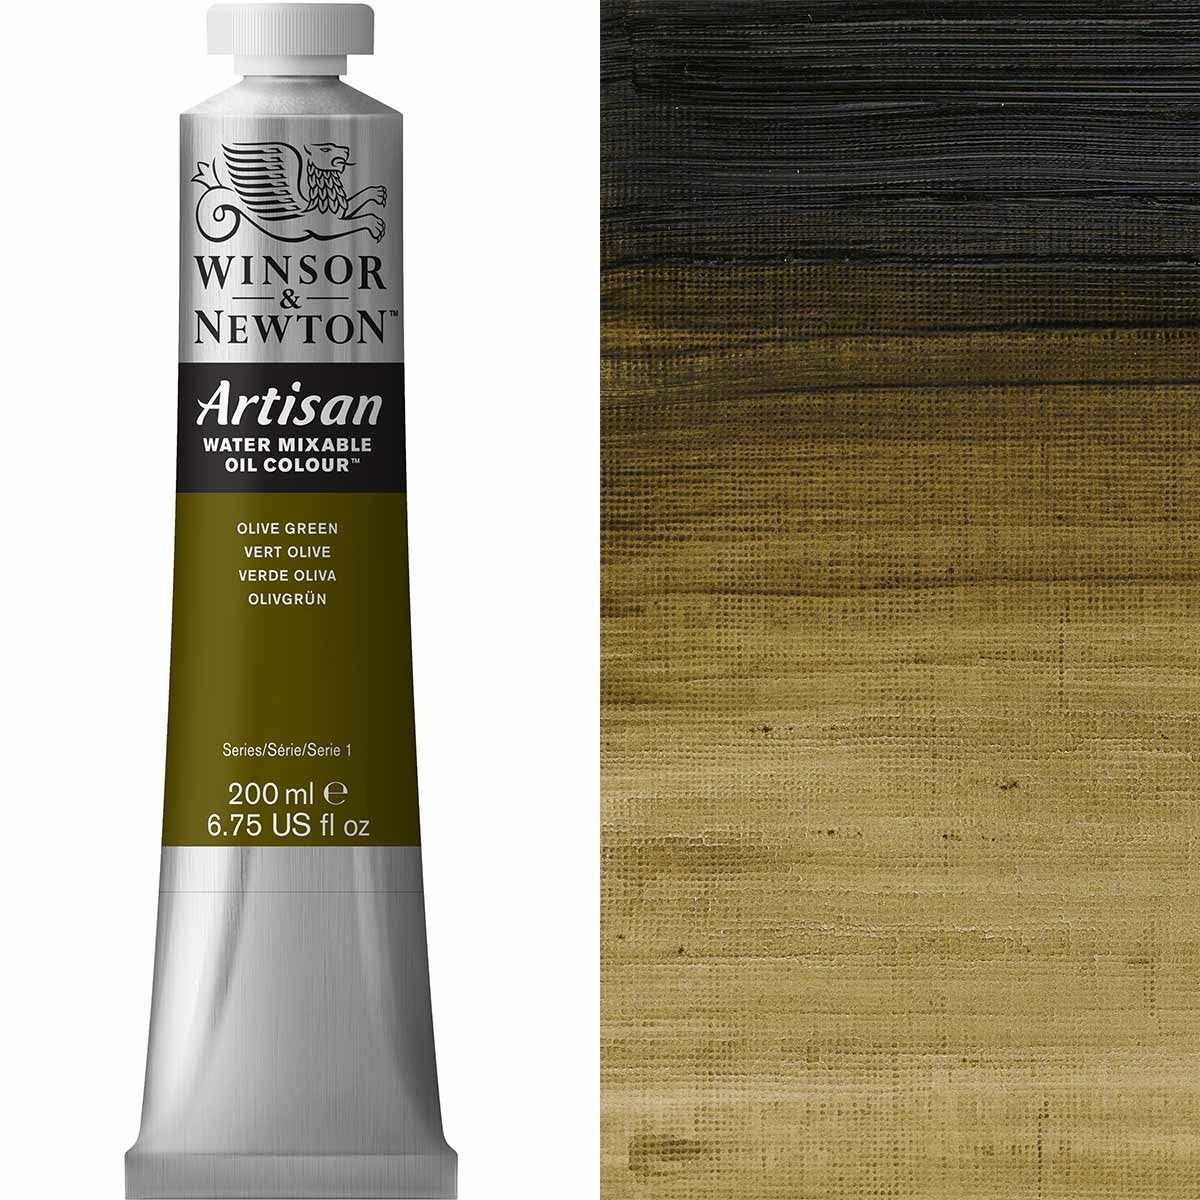 Winsor and Newton - Artisan Oil Colour Watermixable - 200ml - Olive Green